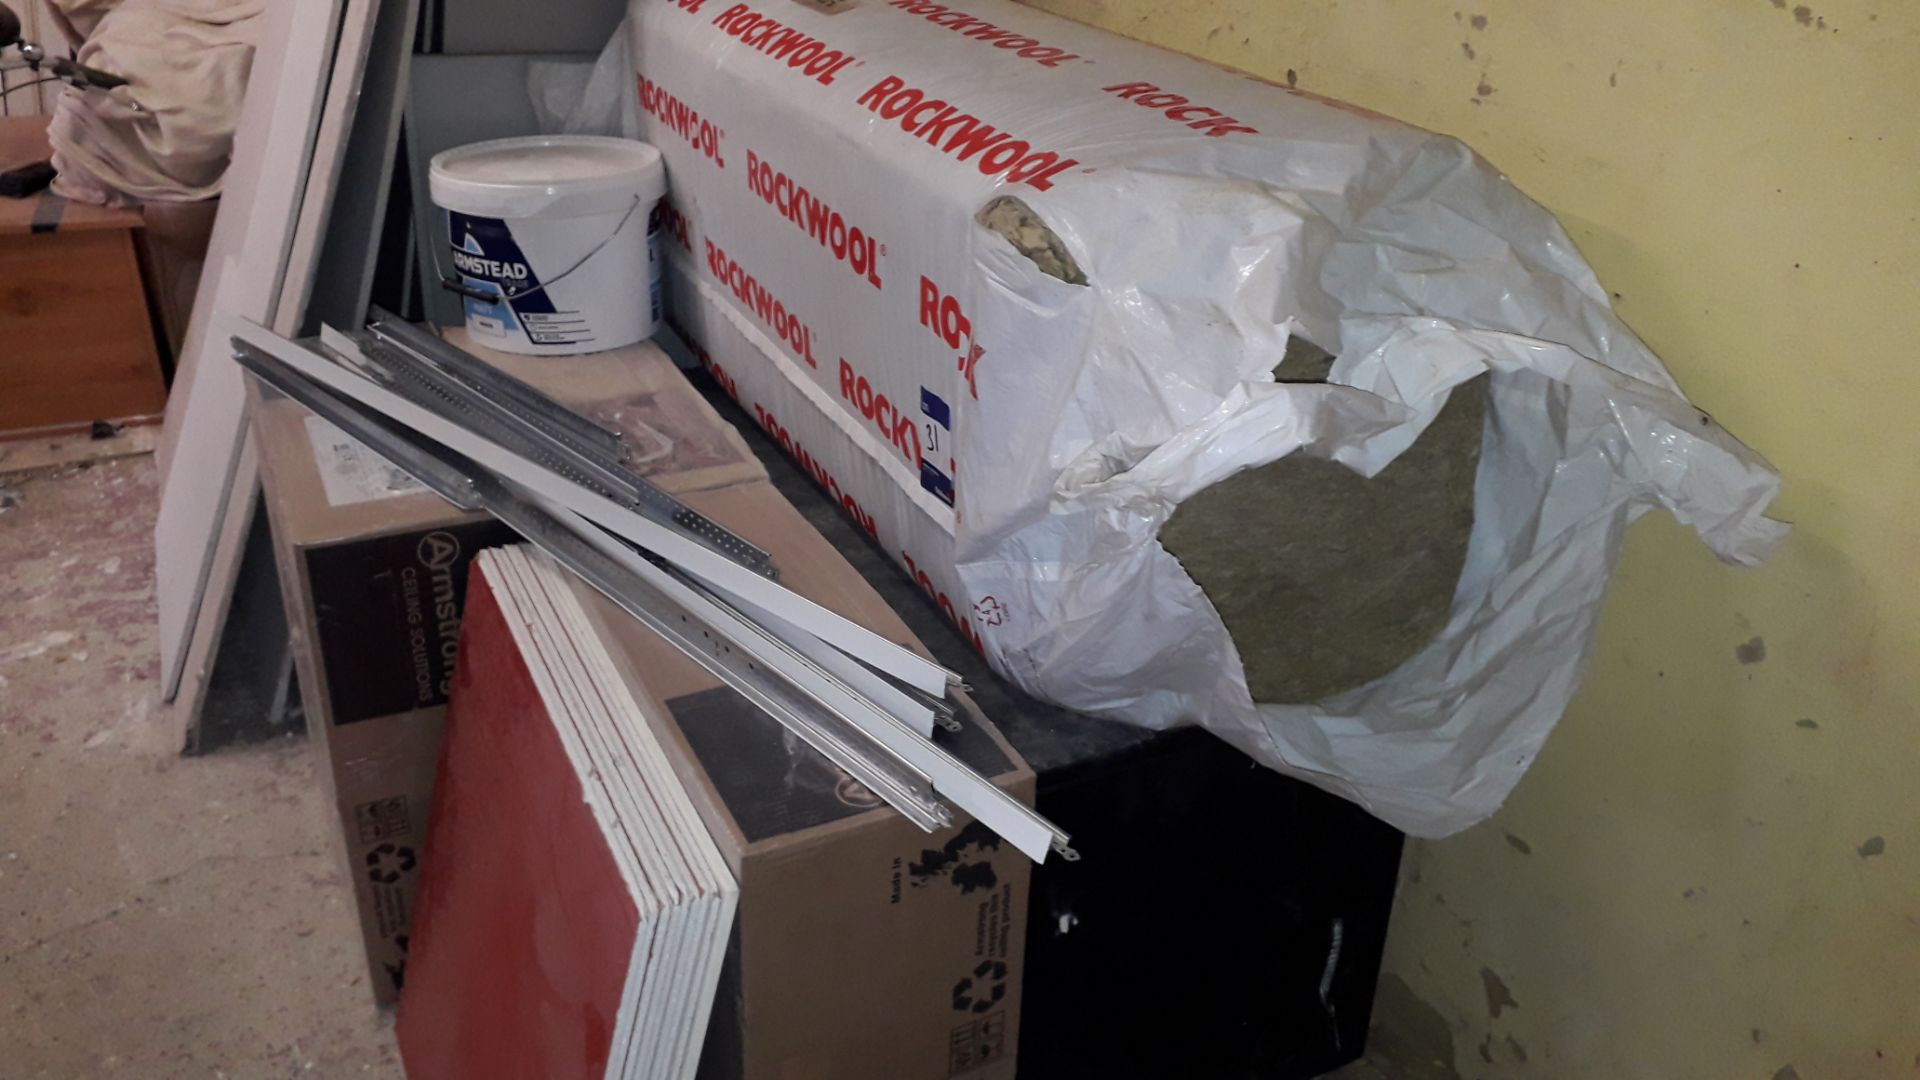 Timber Site Box, 3 Boxes of Armstrong Ceiling Tiles and a Roll of Rock Wall Insulation - Image 2 of 3